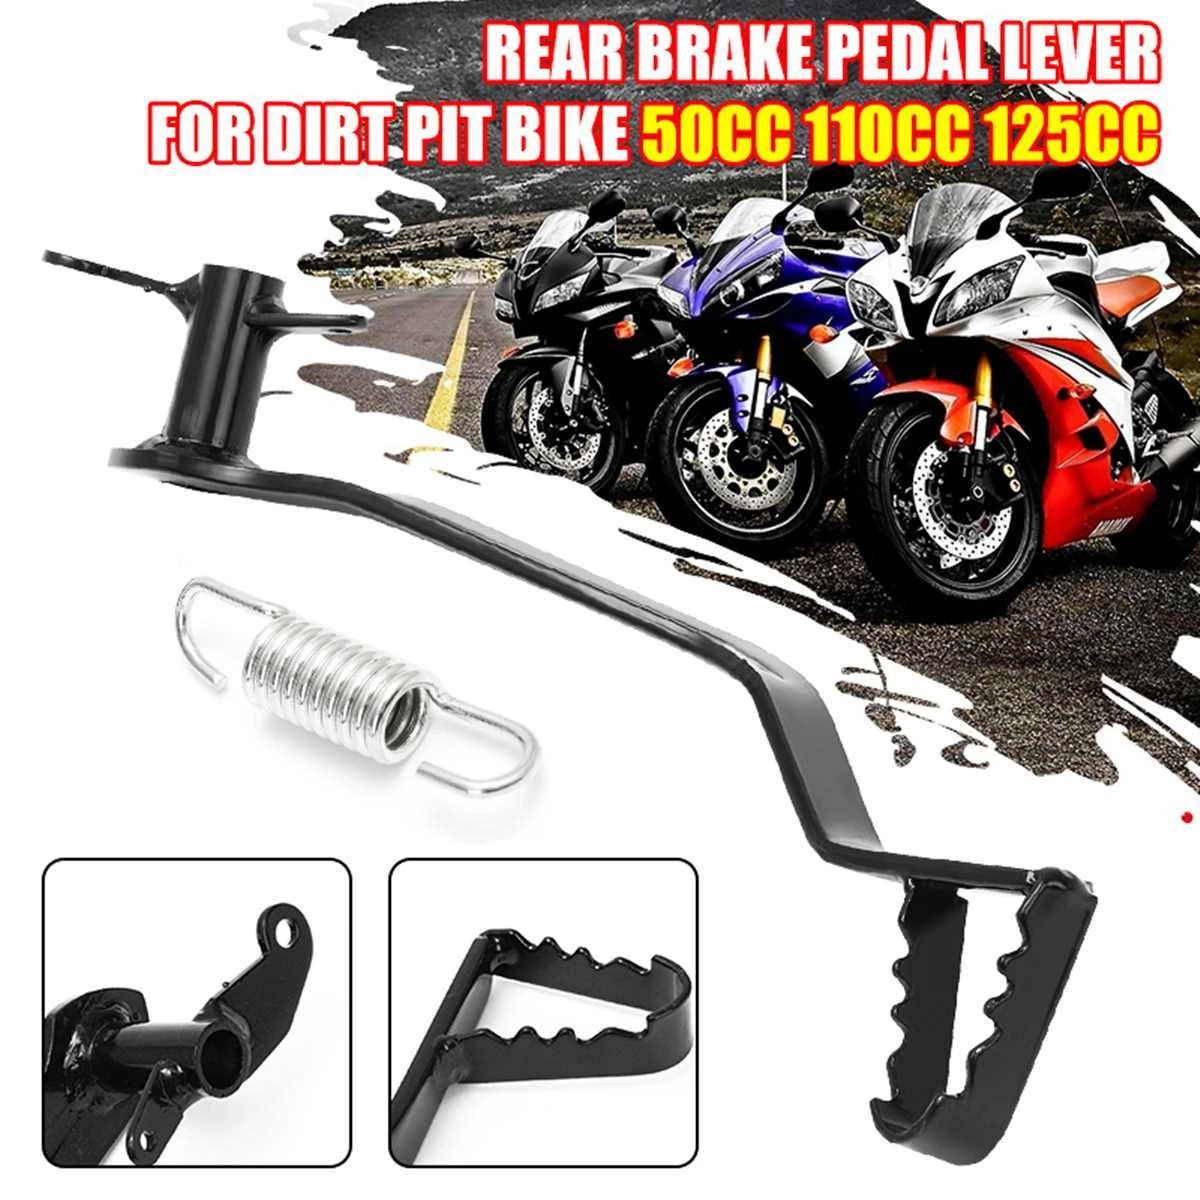 Universal Motorcycle Rear Hydraulic Brake Lever Pedal & Spring Motorbike Foot Rest for Pit Dirt Bike 50Cc 110Cc 125Cc